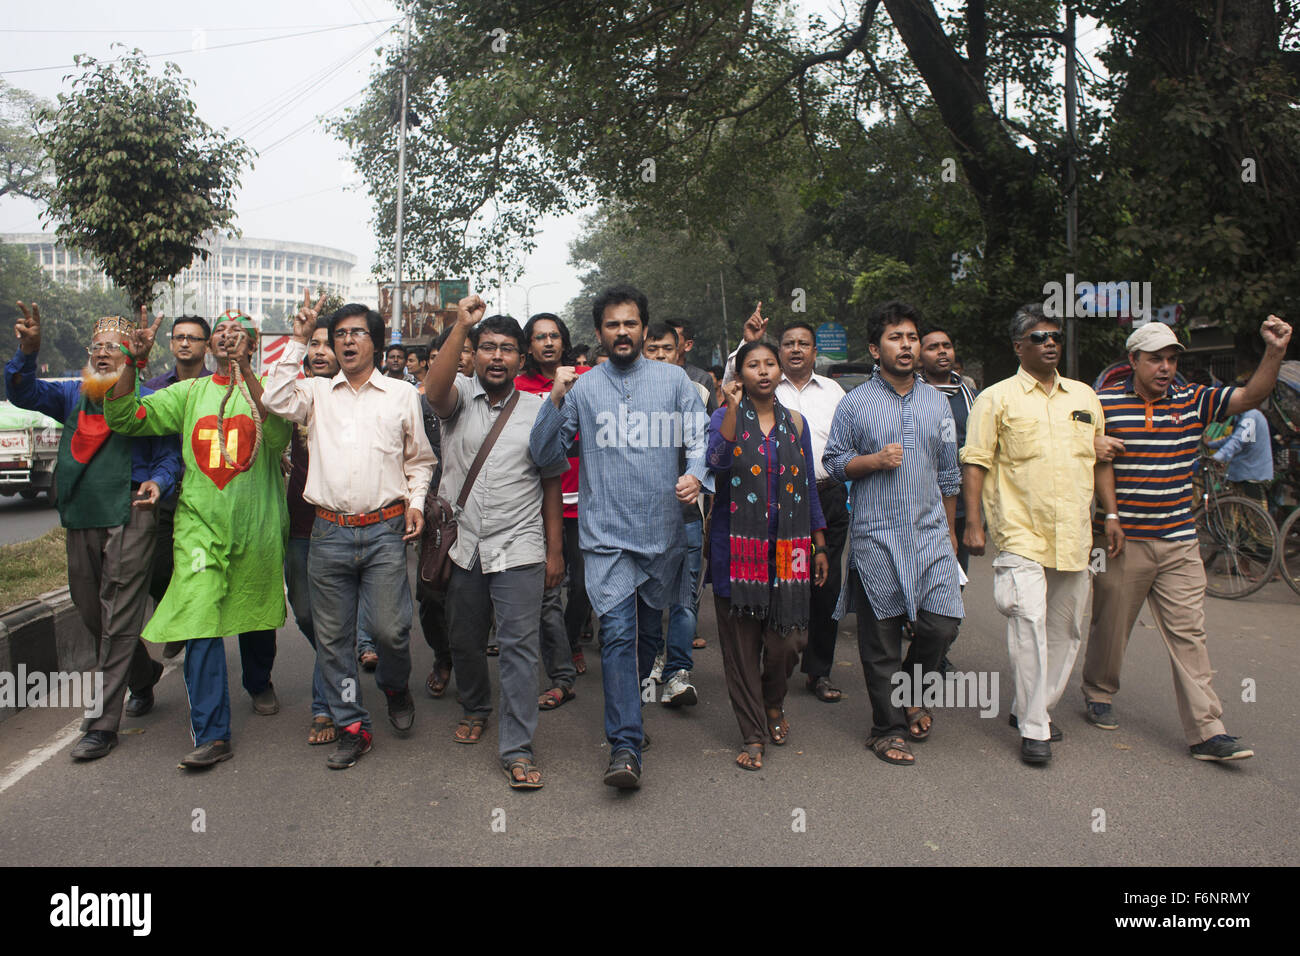 Dhaka, Bangladesh. 18th Nov, 2015. Bangladeshi Social activist bring out procession following the sentencing of war-crime convicts Ali Ahsan Mohammad Mujahid and Salauddin Quader Chowdhury. The Supreme Court has upheld the death sentences of war-crime convicts Ali Ahsan Mohammad Mujahid and Salauddin Quader Chowdhury. Salauddin Quader, infamous as Chittagong's wartime terror, was sentenced to death by a war crimes tribunal on Oct 1, 2013 for his role in the mass killing and torture of Hindus and Awami League supporters. Credit:  ZUMA Press, Inc./Alamy Live News Stock Photo